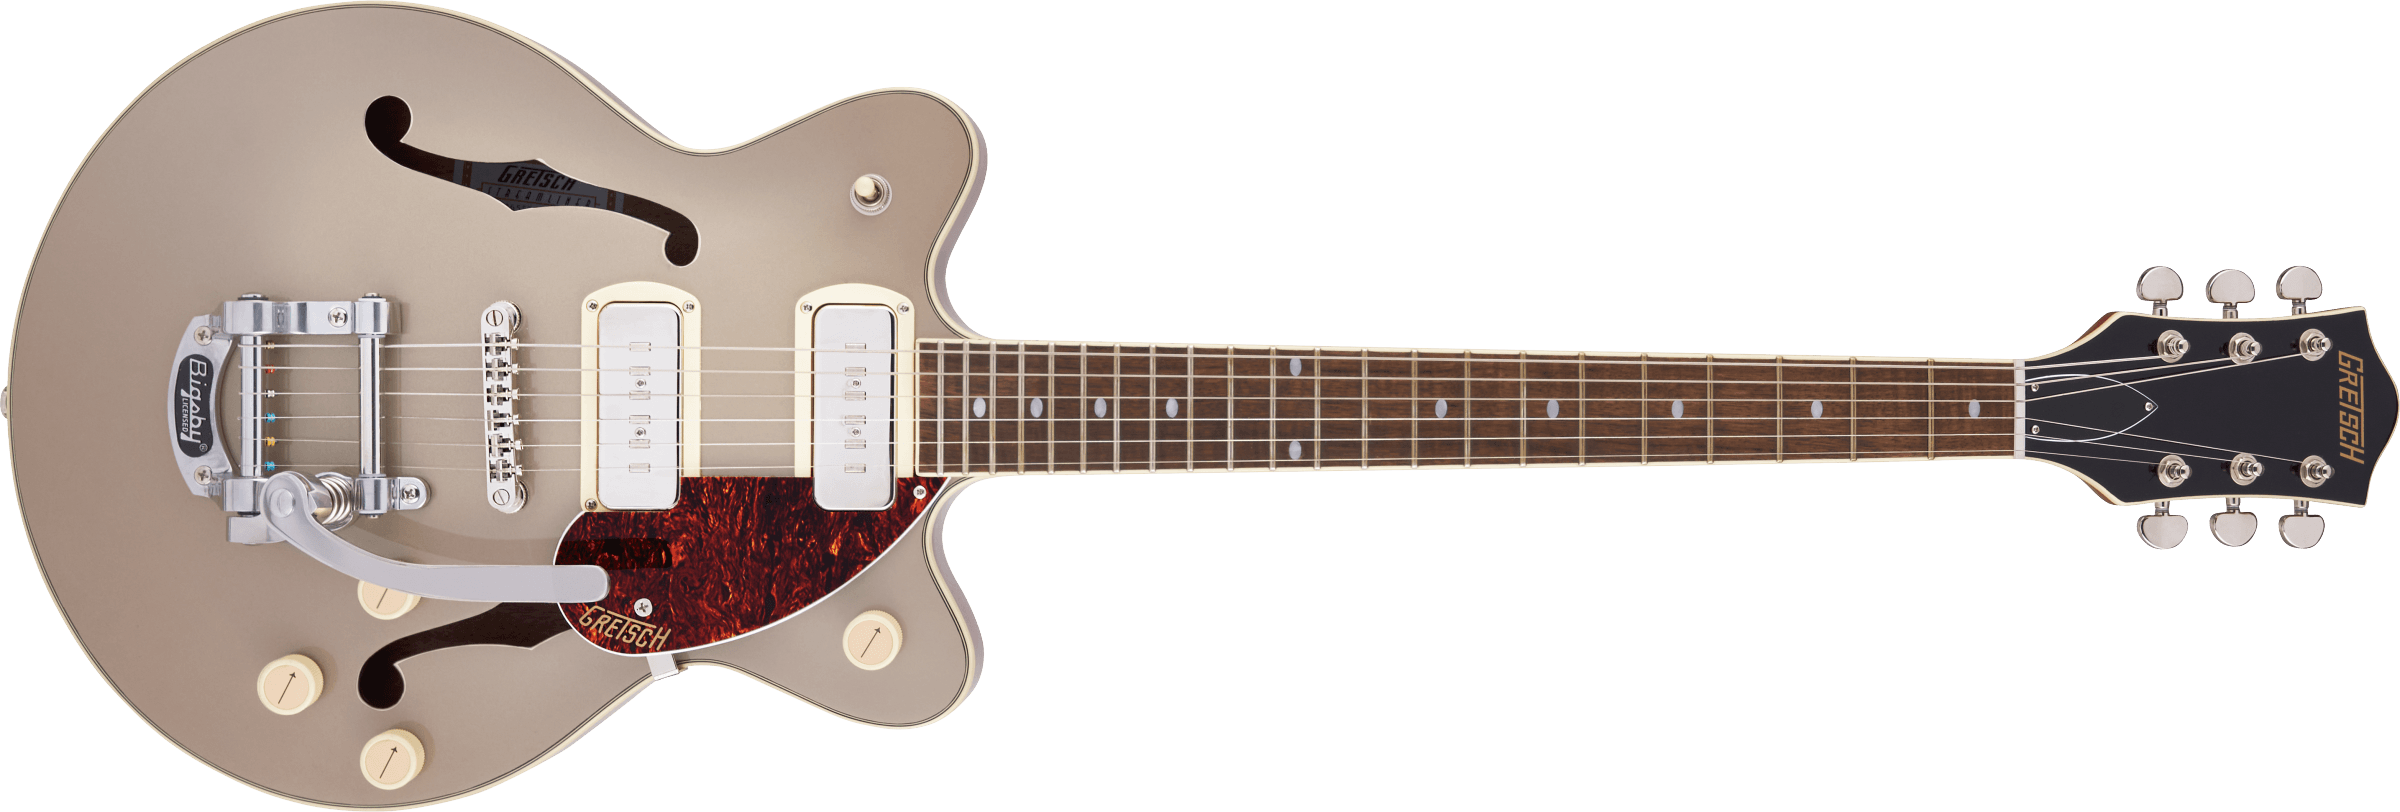 Gretsch G2655T-P90 Streamliner™ Center Block Jr. Double-Cut P90 with Bigsby®, Laurel Fingerboard, Two-Tone Sahara Metallic and Vintage Mahogany Stain 2807700544